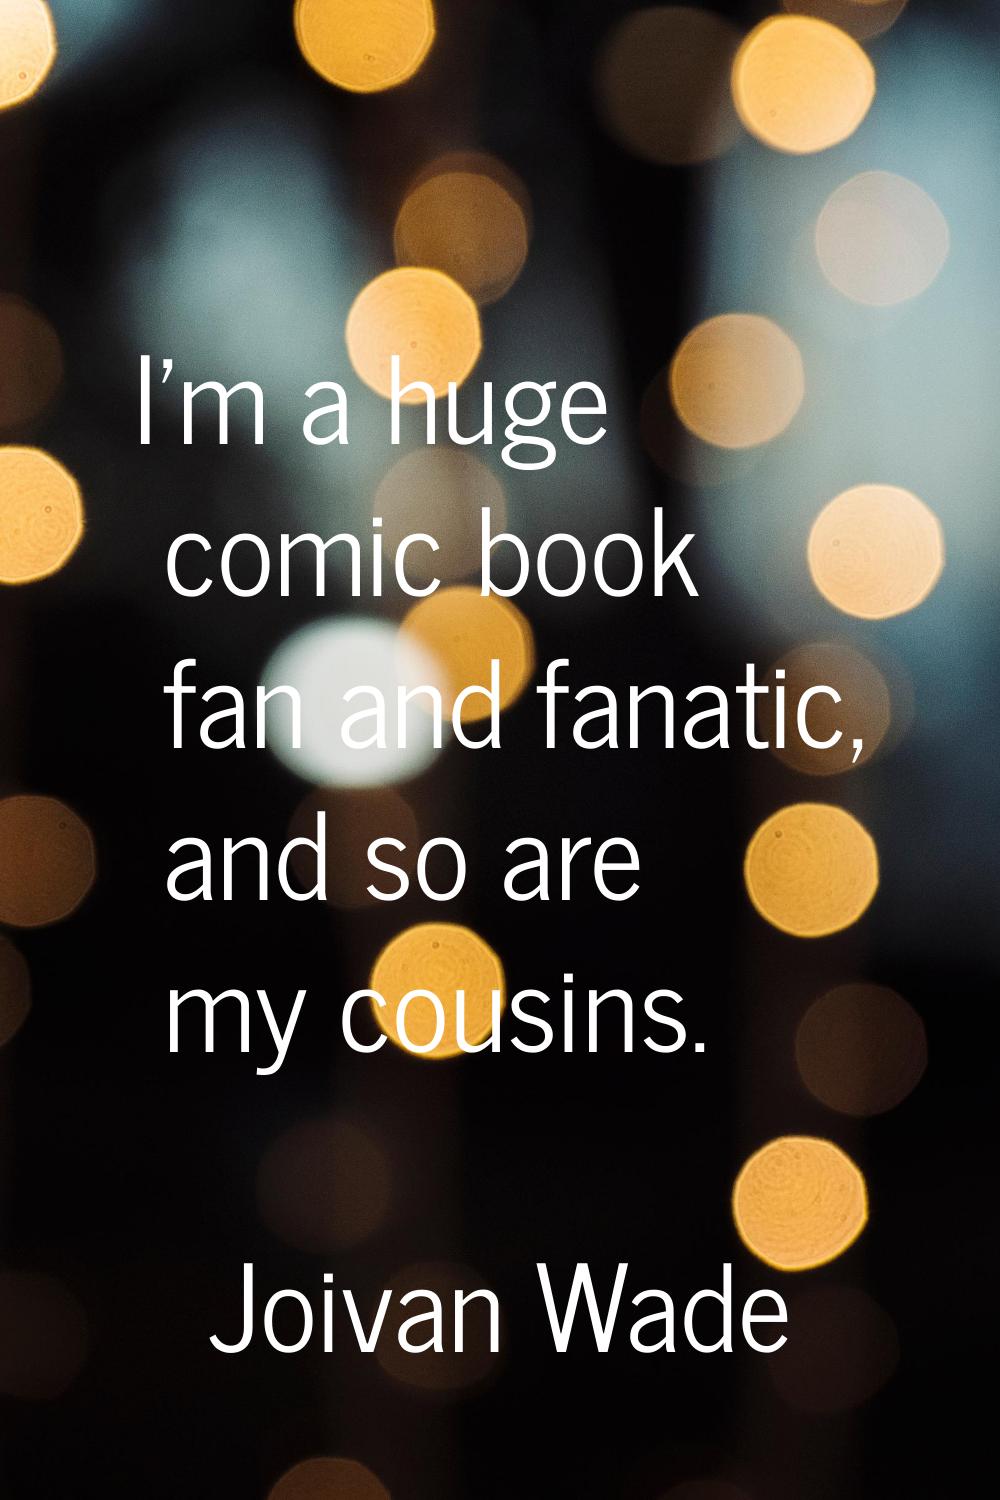 I'm a huge comic book fan and fanatic, and so are my cousins.